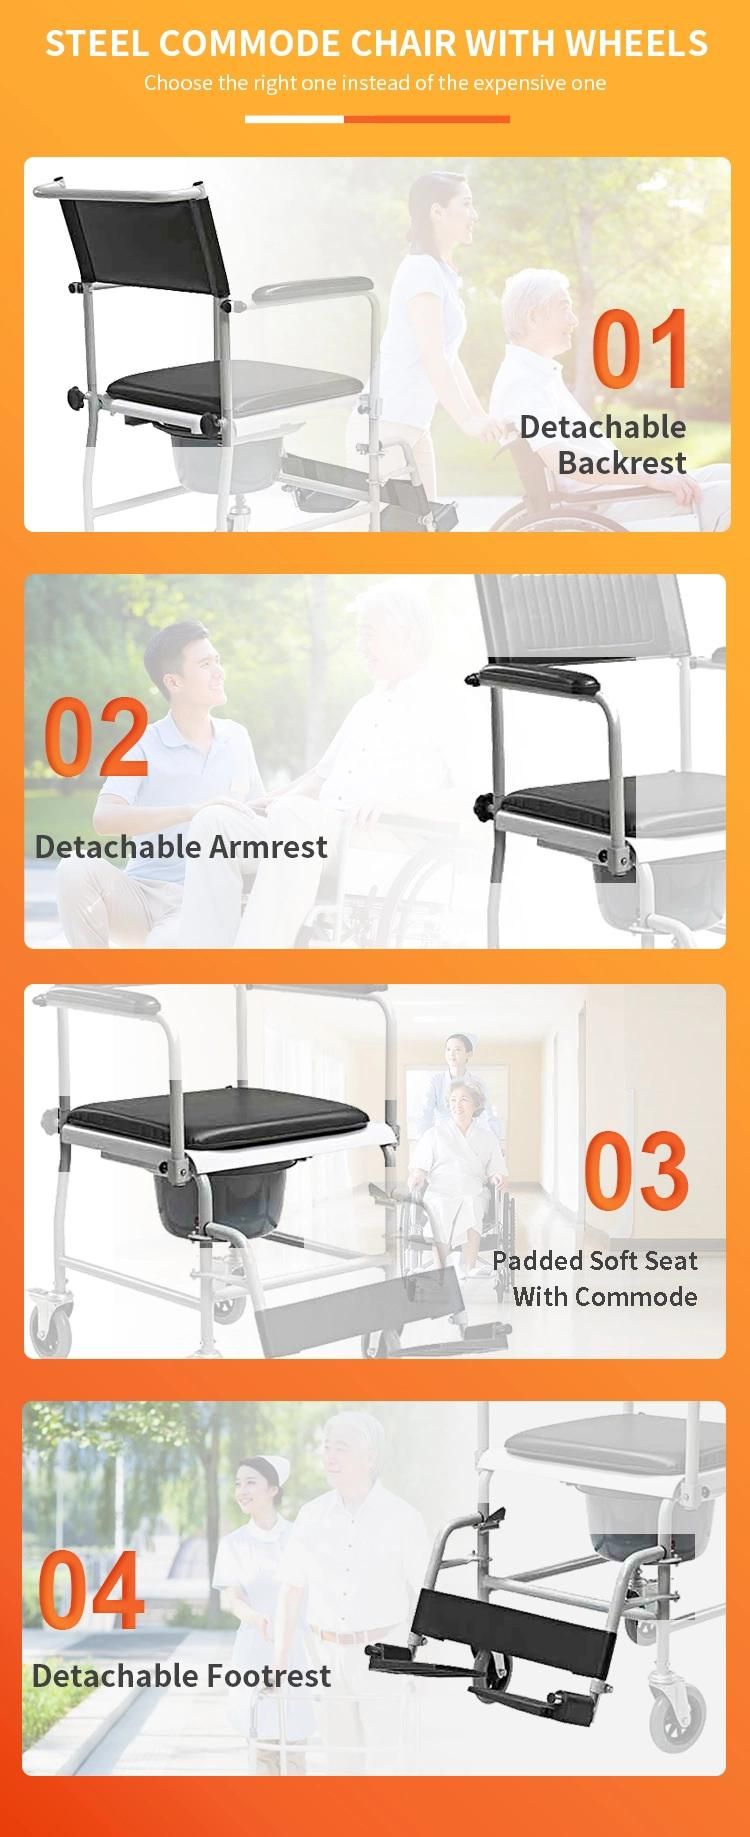 Powder Coated Steel Frame Padded Soft Seat Cushion Easy to Release Arm for Patient Transfters Detachable Footrest with 5inch Wheels Commode Chair